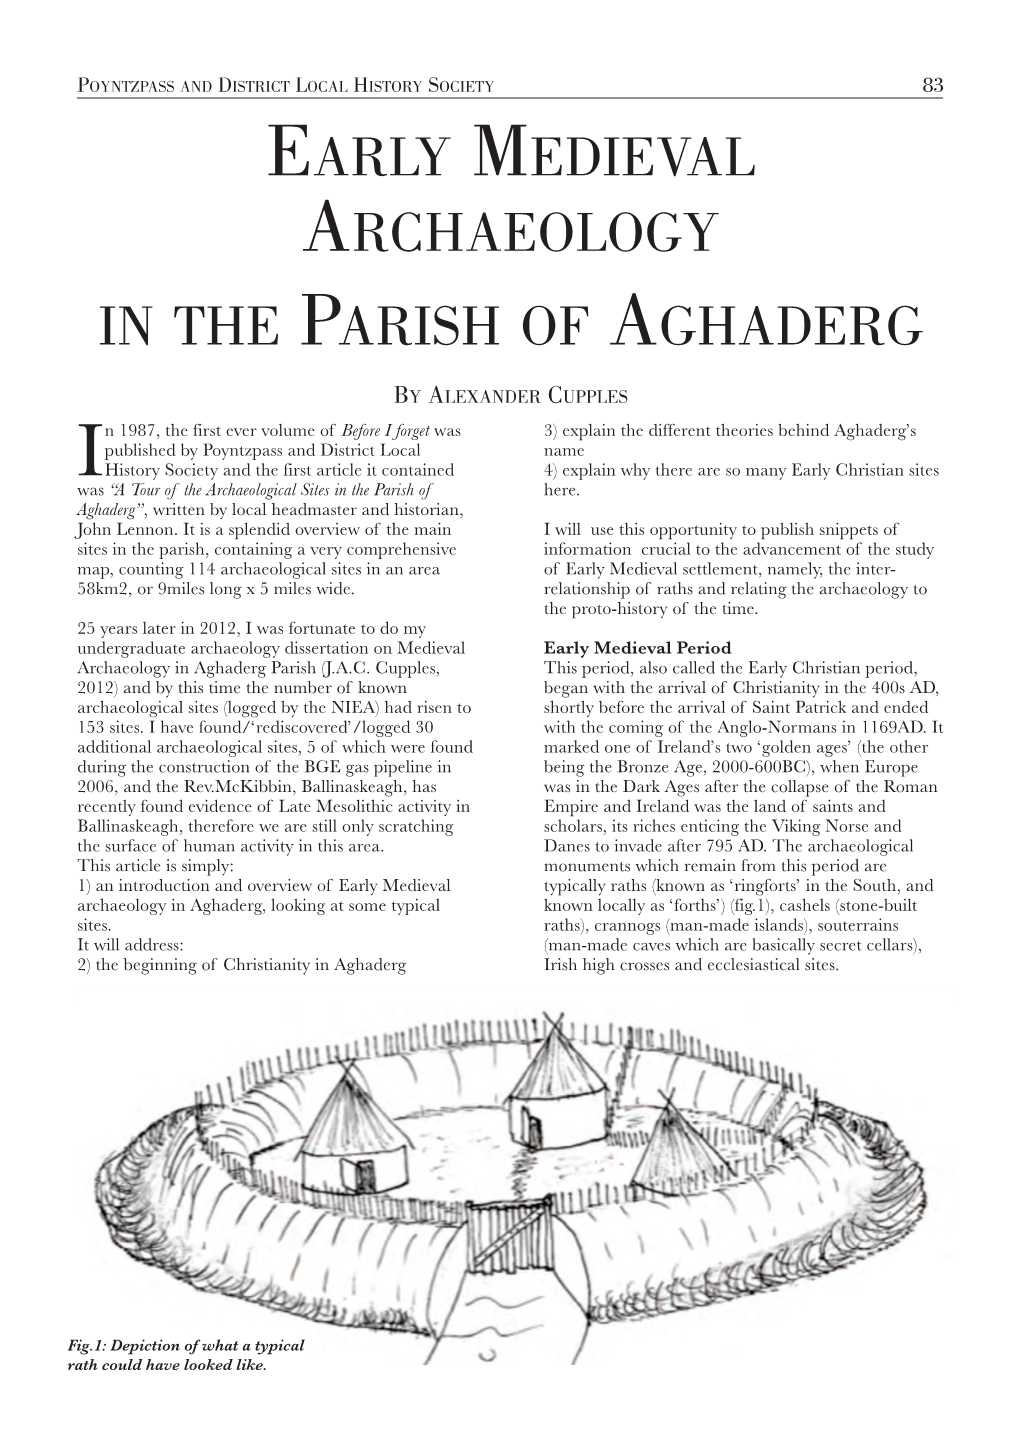 Early Medieval Archaeology in the Parish of Aghaderg